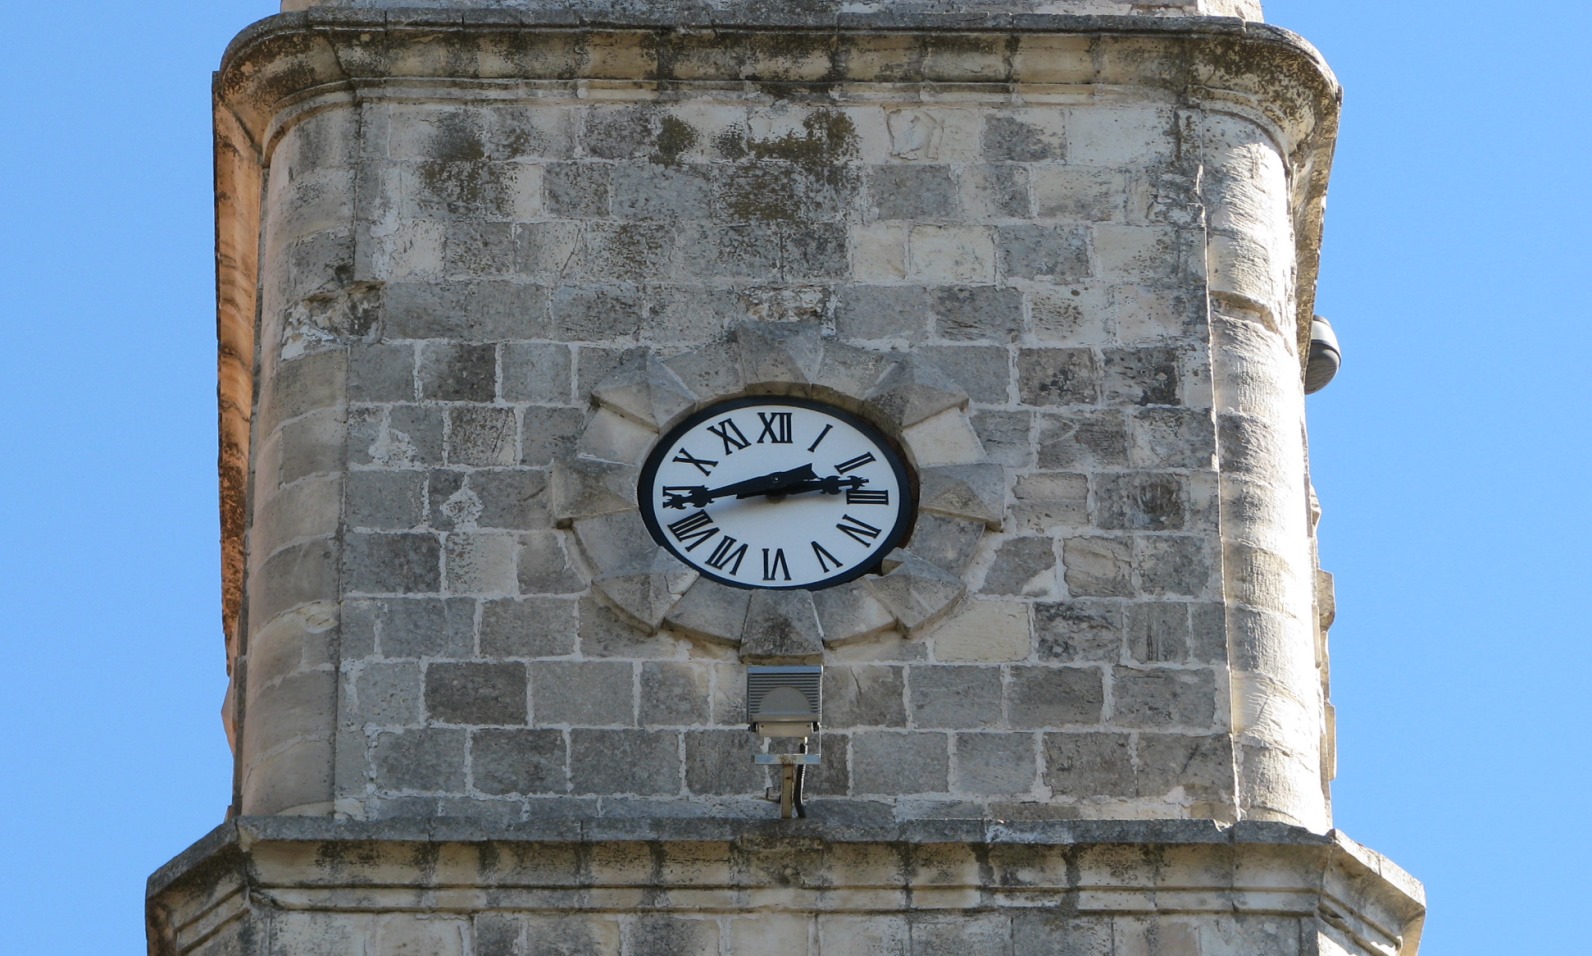 A close-up of the clock on the Safed clock tower. Photo by Herman/Wikimedia Commons